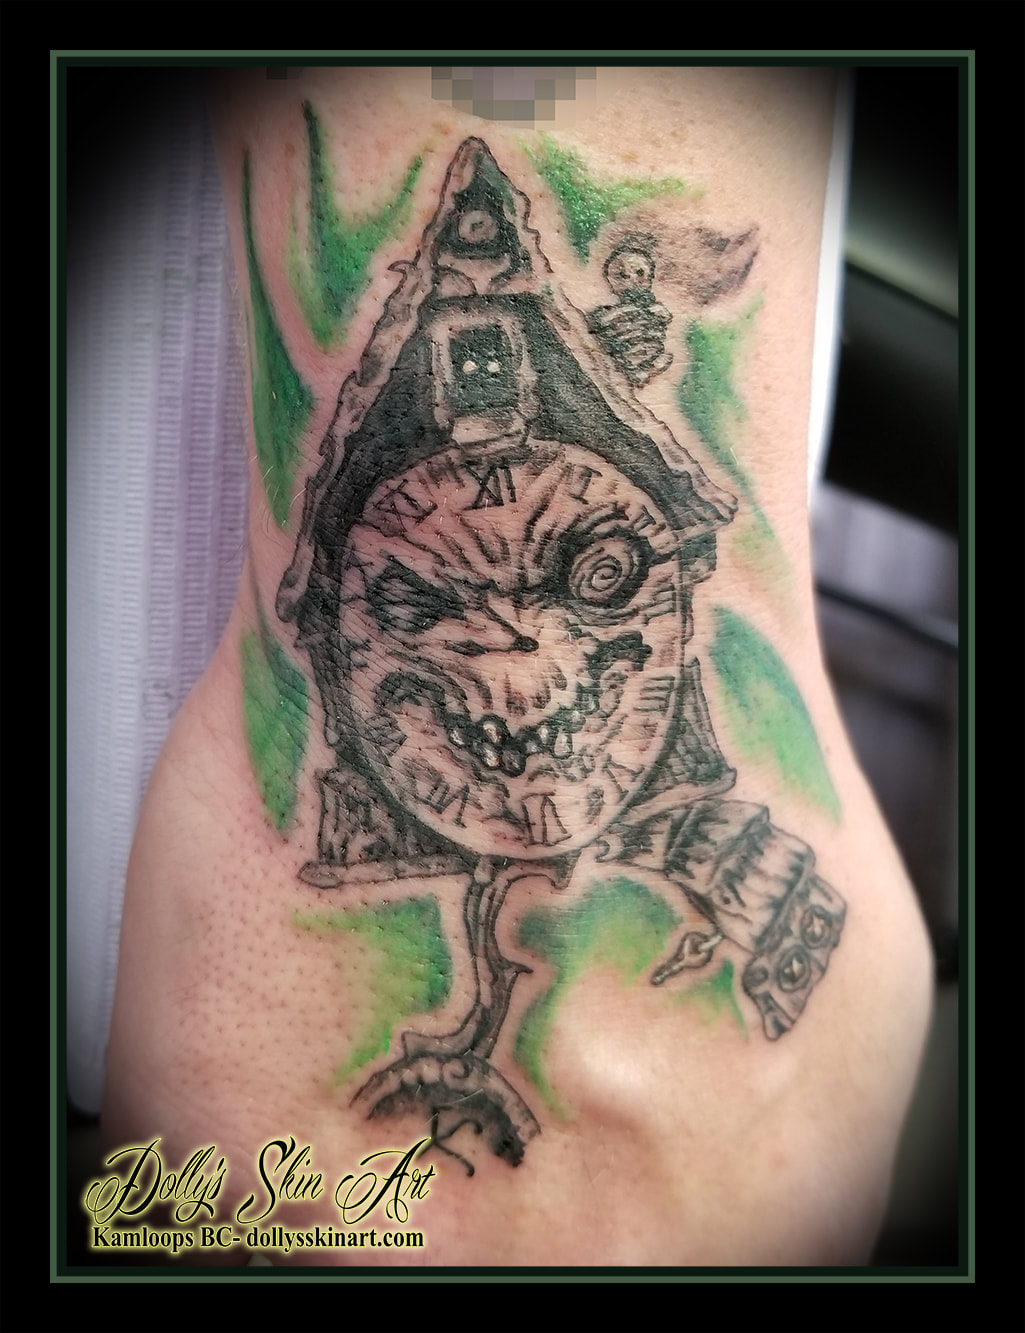 black and grey chaotic clock face green white hand wrist tattoo kamloops tattoo dolly's skin art